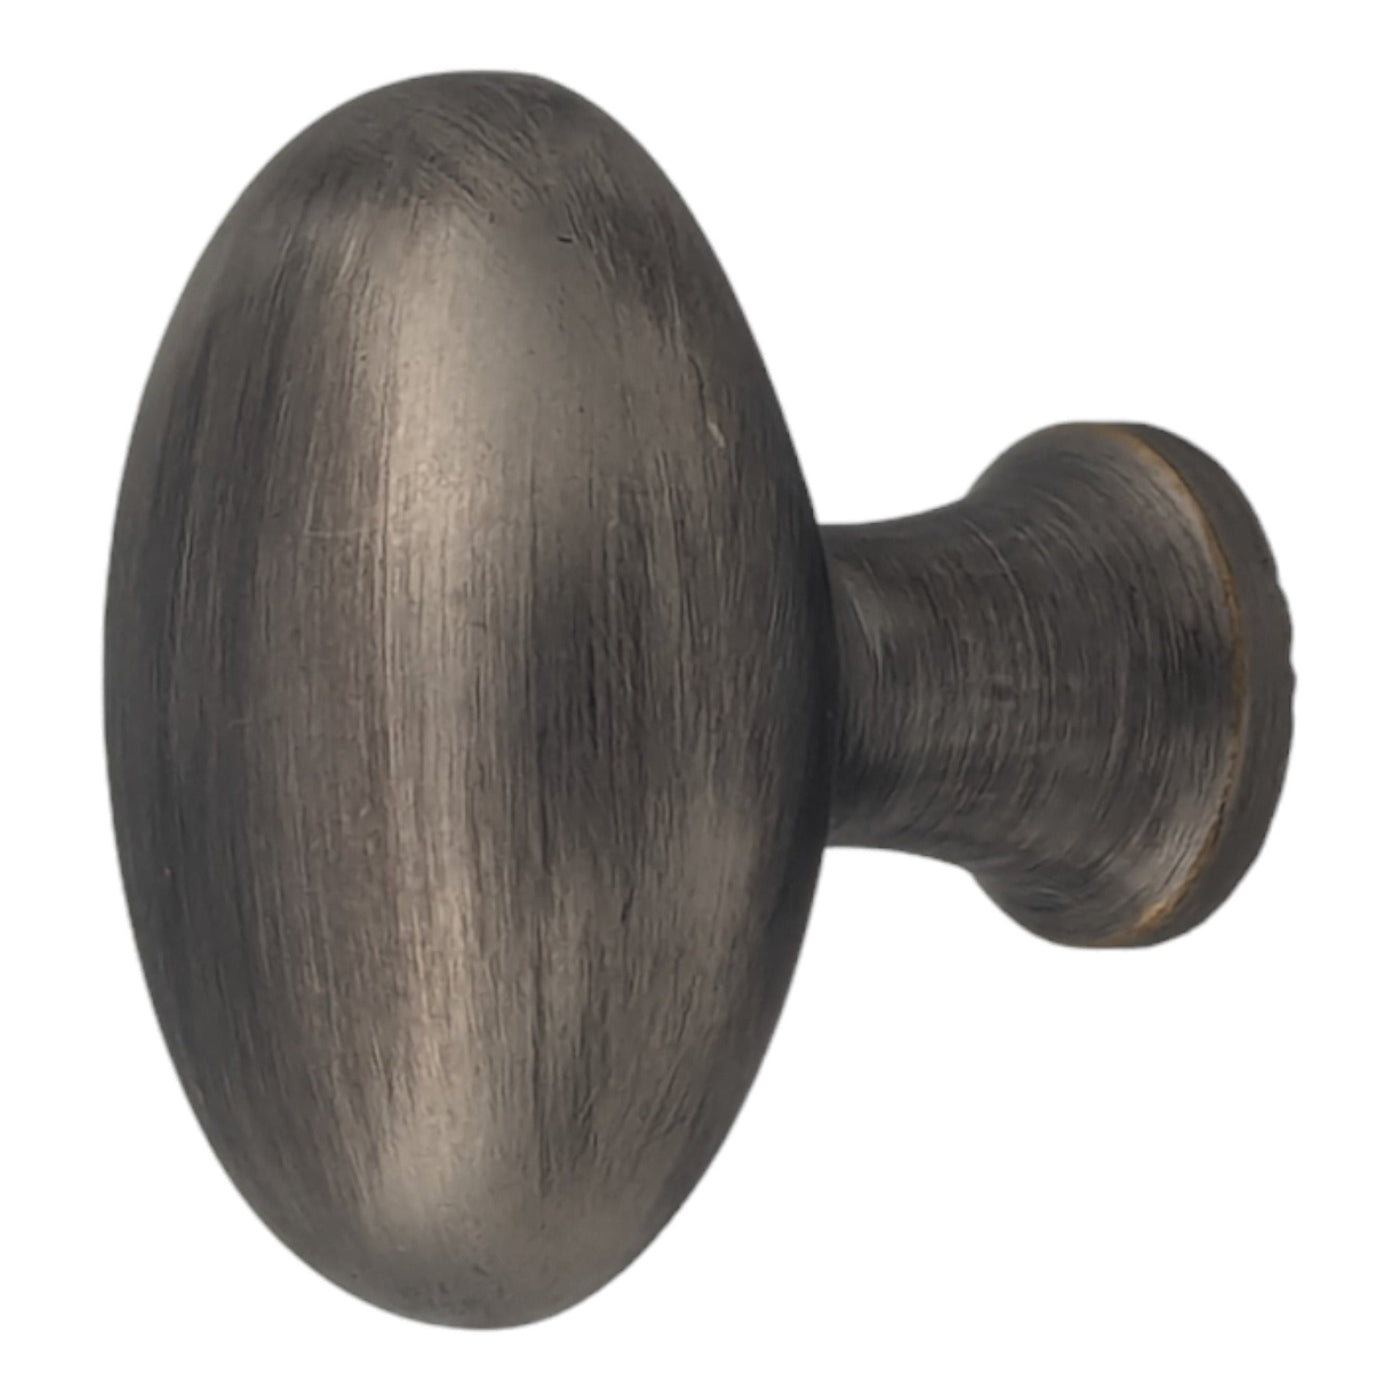 1 1/2 Inch Brass Egg Cabinet Knob (Several Finishes Available)